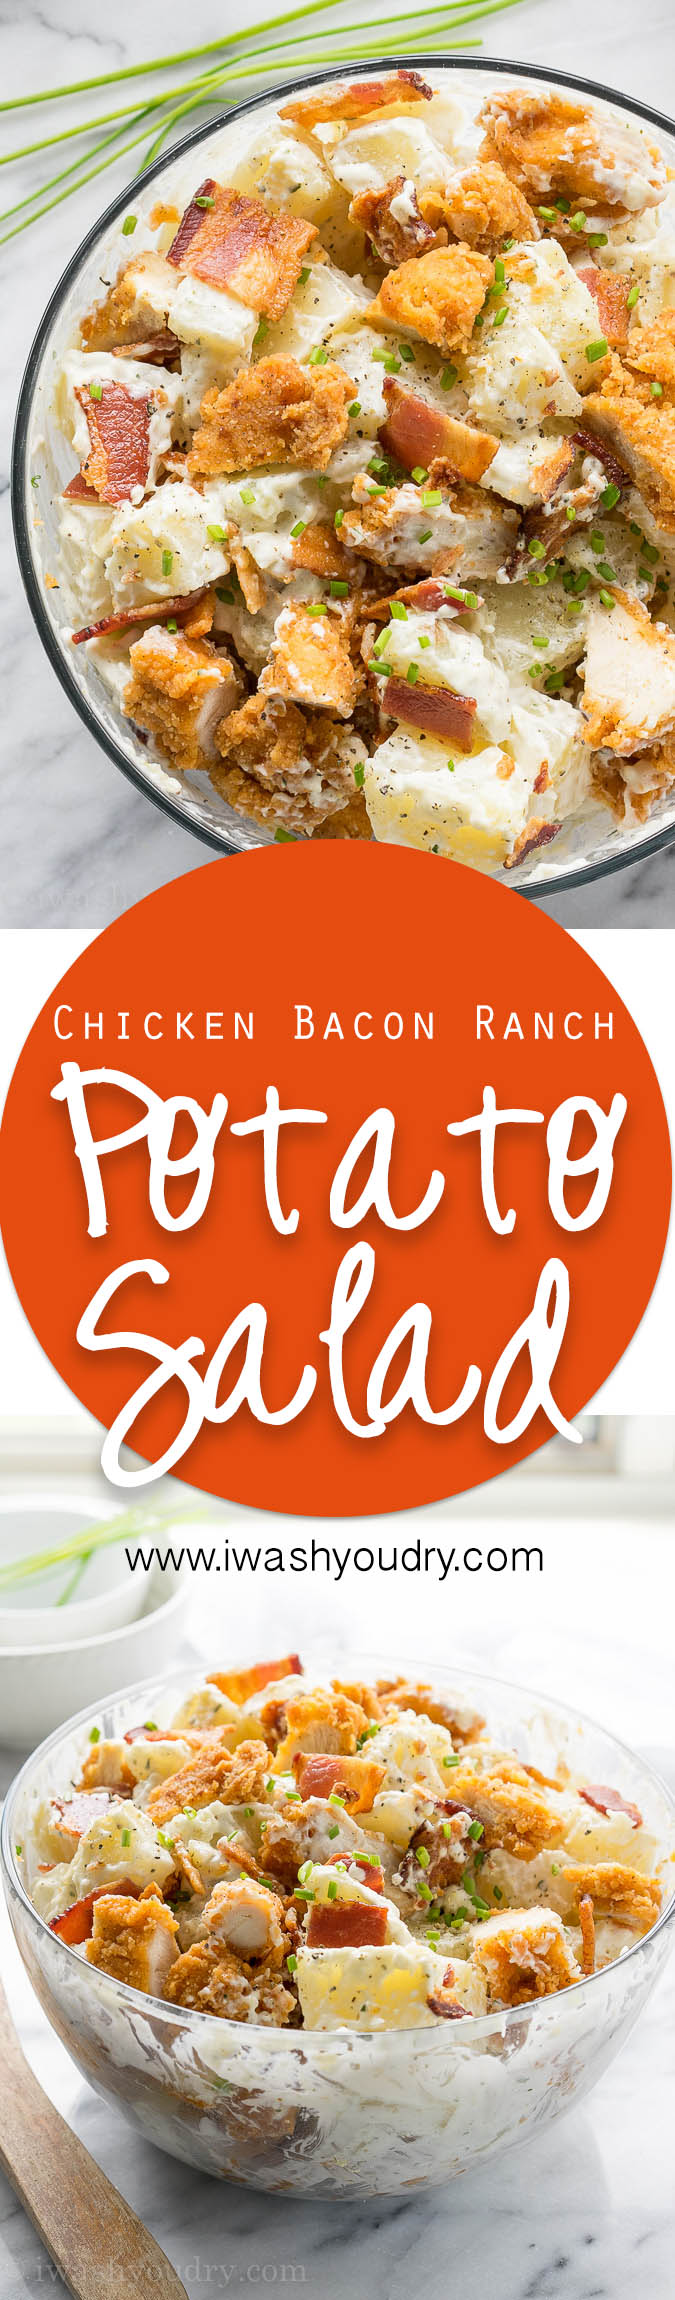 This Chicken Bacon Ranch Potato Salad is full of crispy chicken, bacon and creamy ranch dressing! Everyone loves this simple salad!